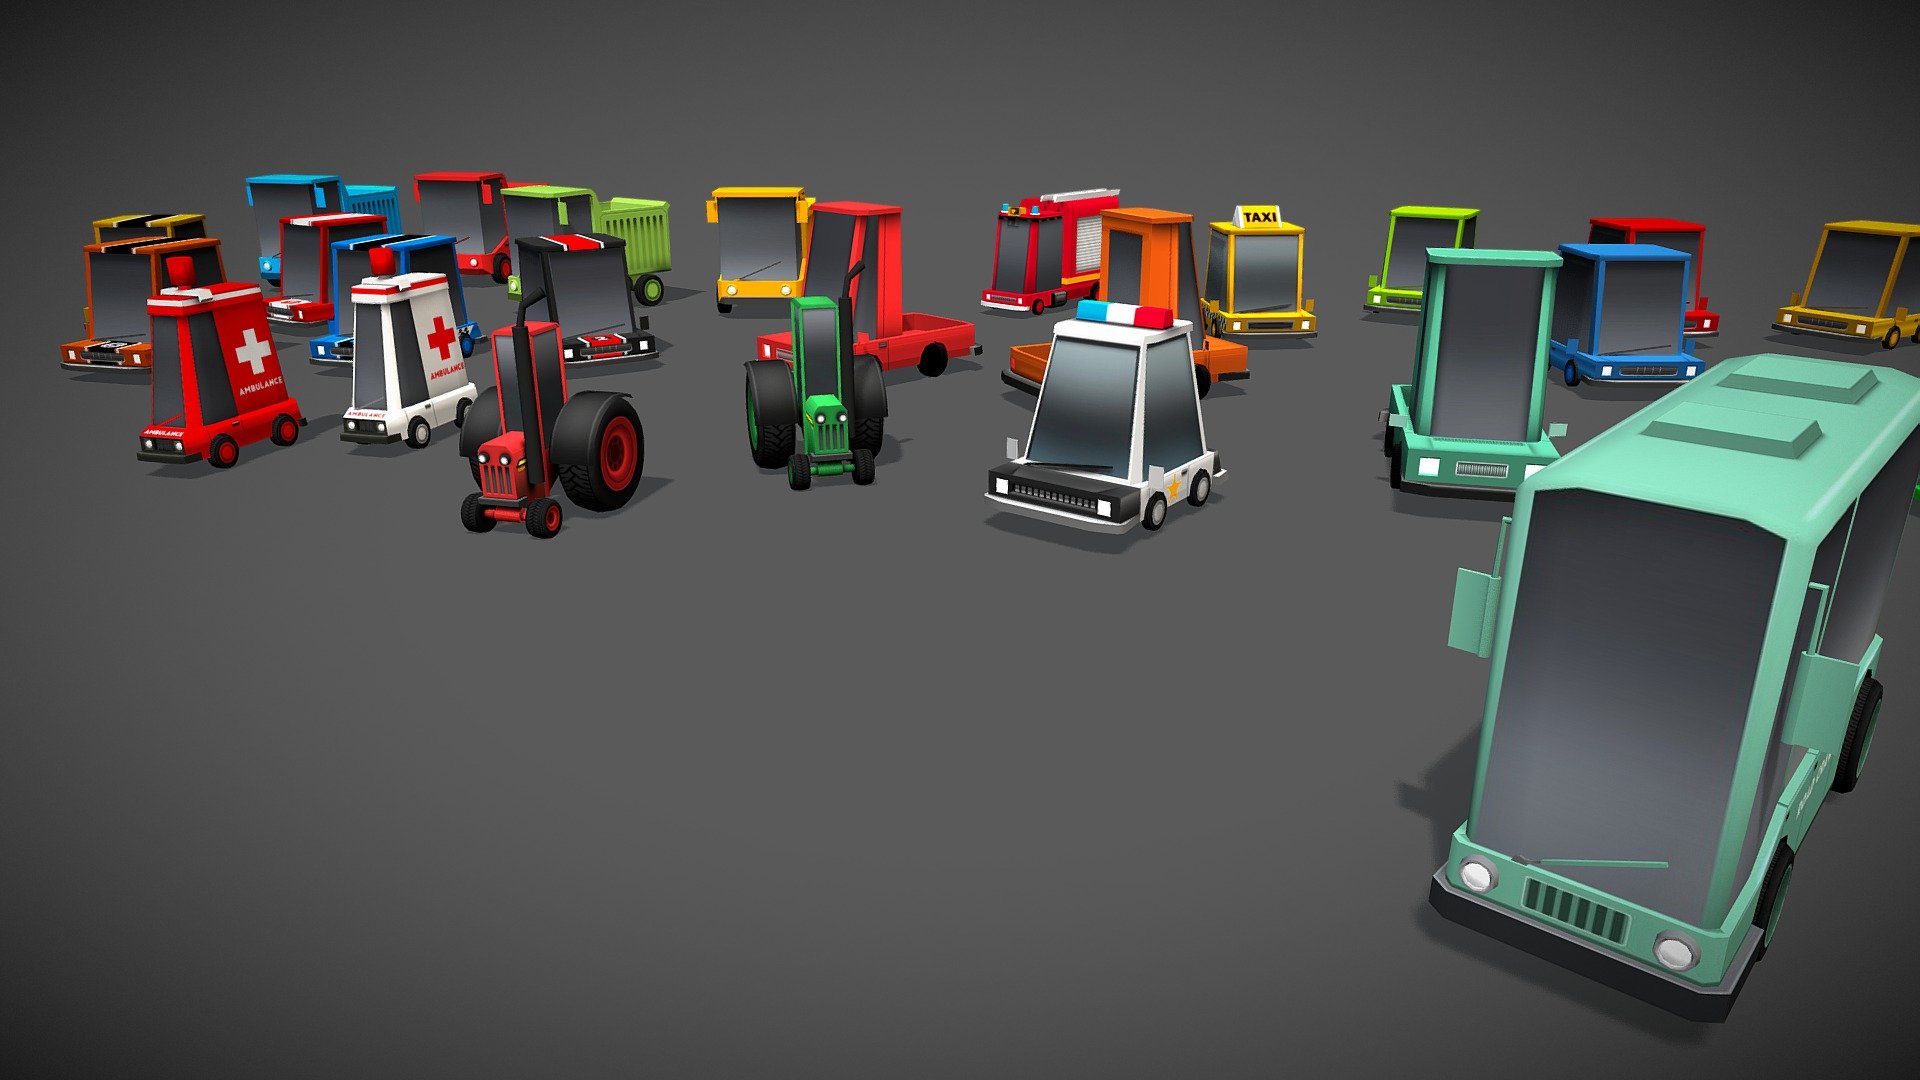 Cute Cartoon Car Pack - is a collection 28 vehicles ready to be rigged and deployed in any game.
The pack includes cars, trucks buses and what not 3d model